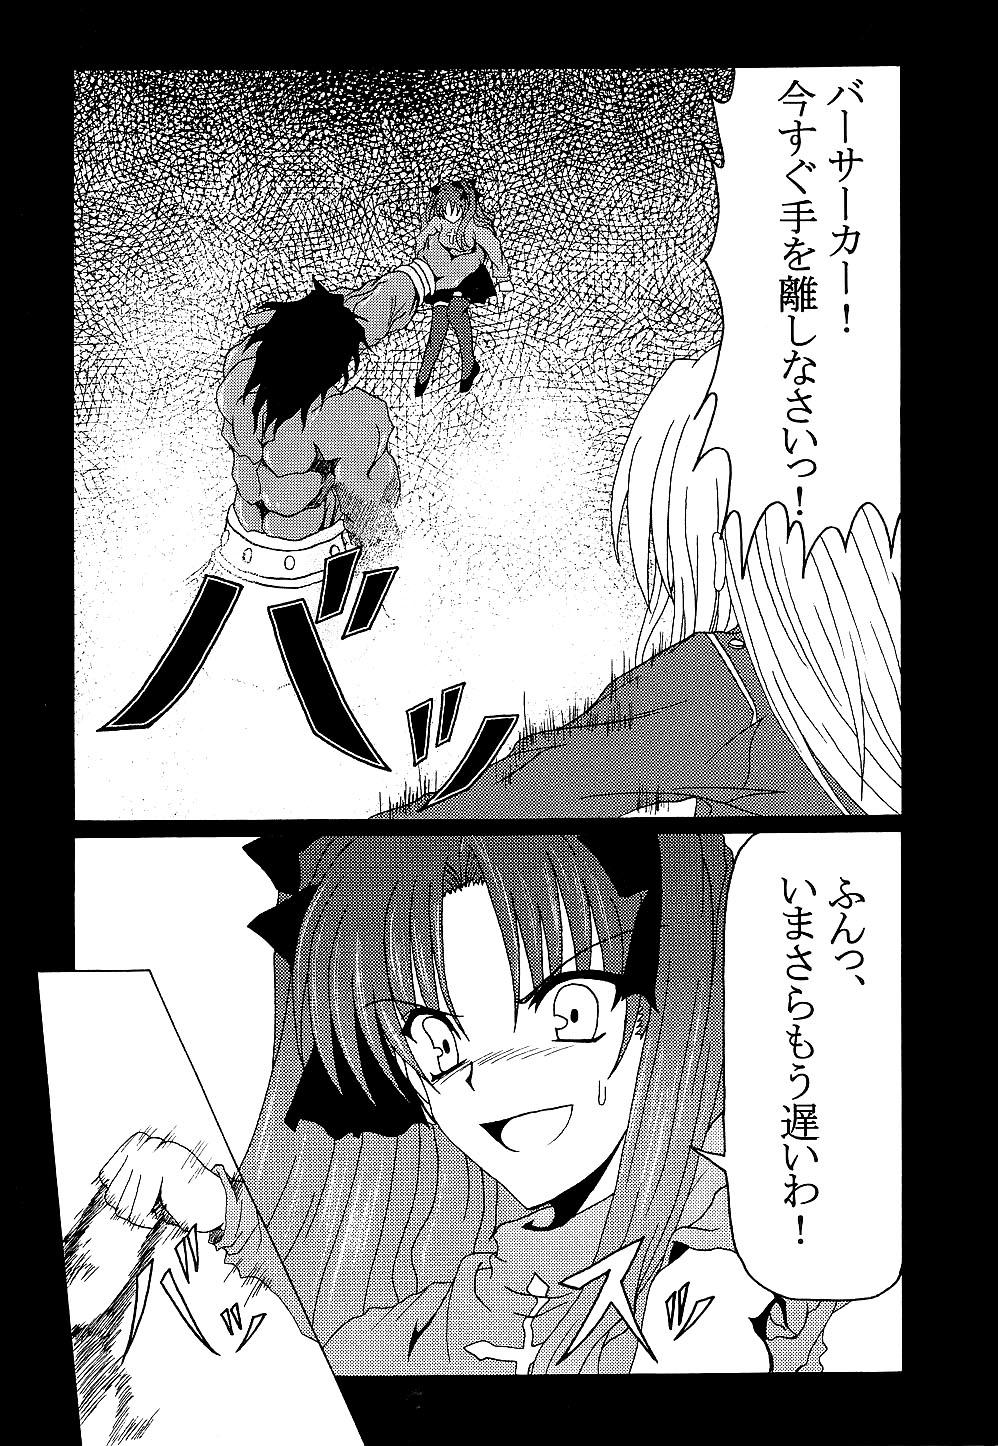 Bottom Fate na Kankei - Fate stay night Old And Young - Page 9